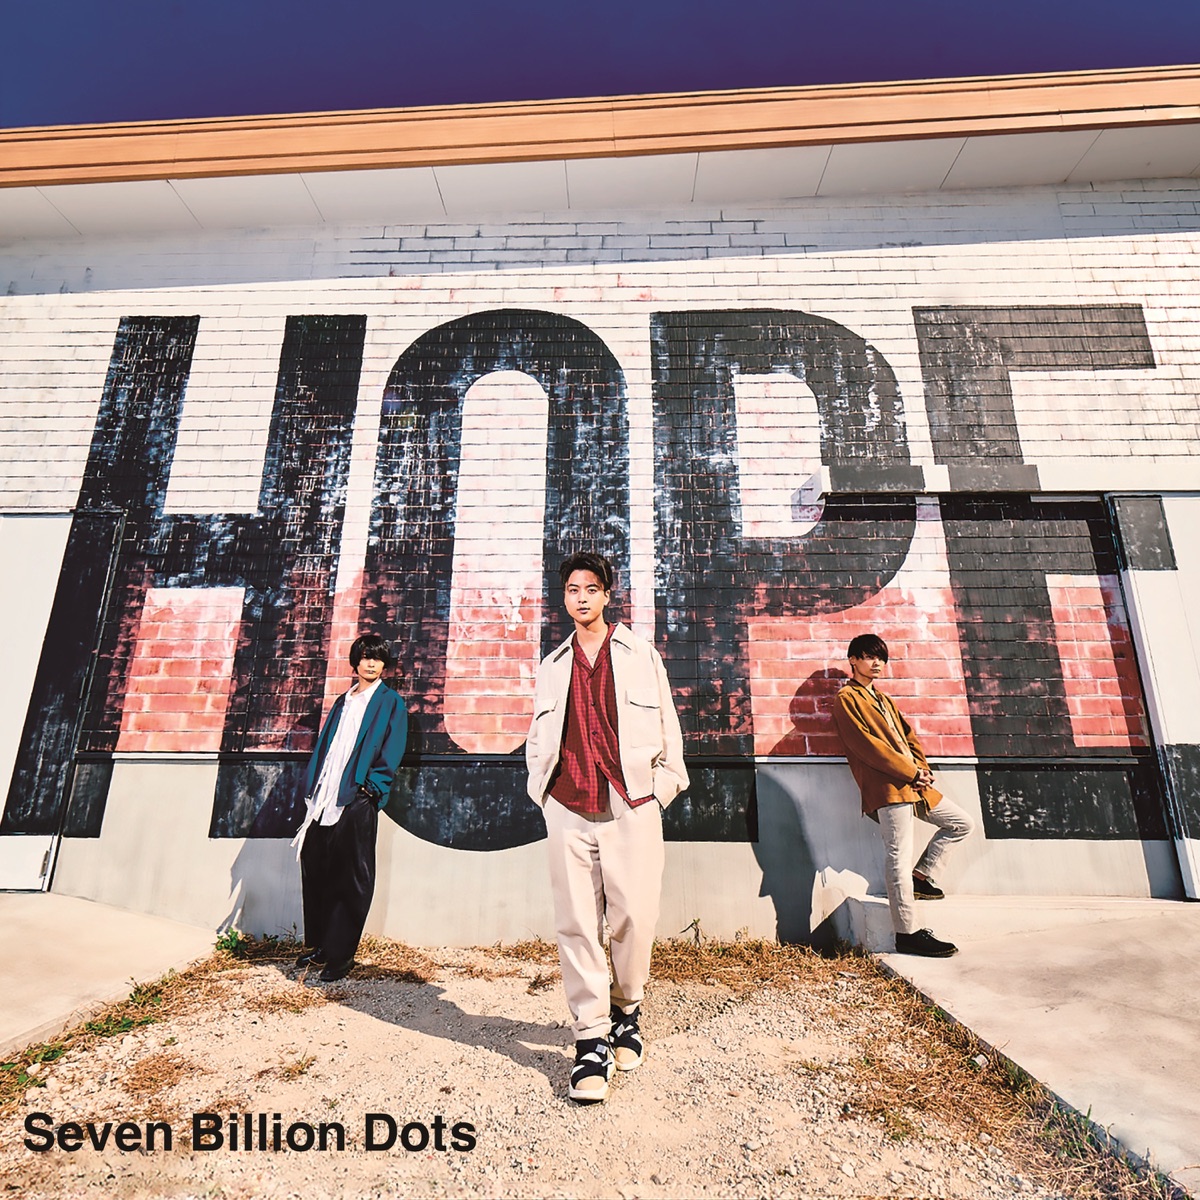 『Seven Billion Dots - Let's get the party started』収録の『HOPE』ジャケット